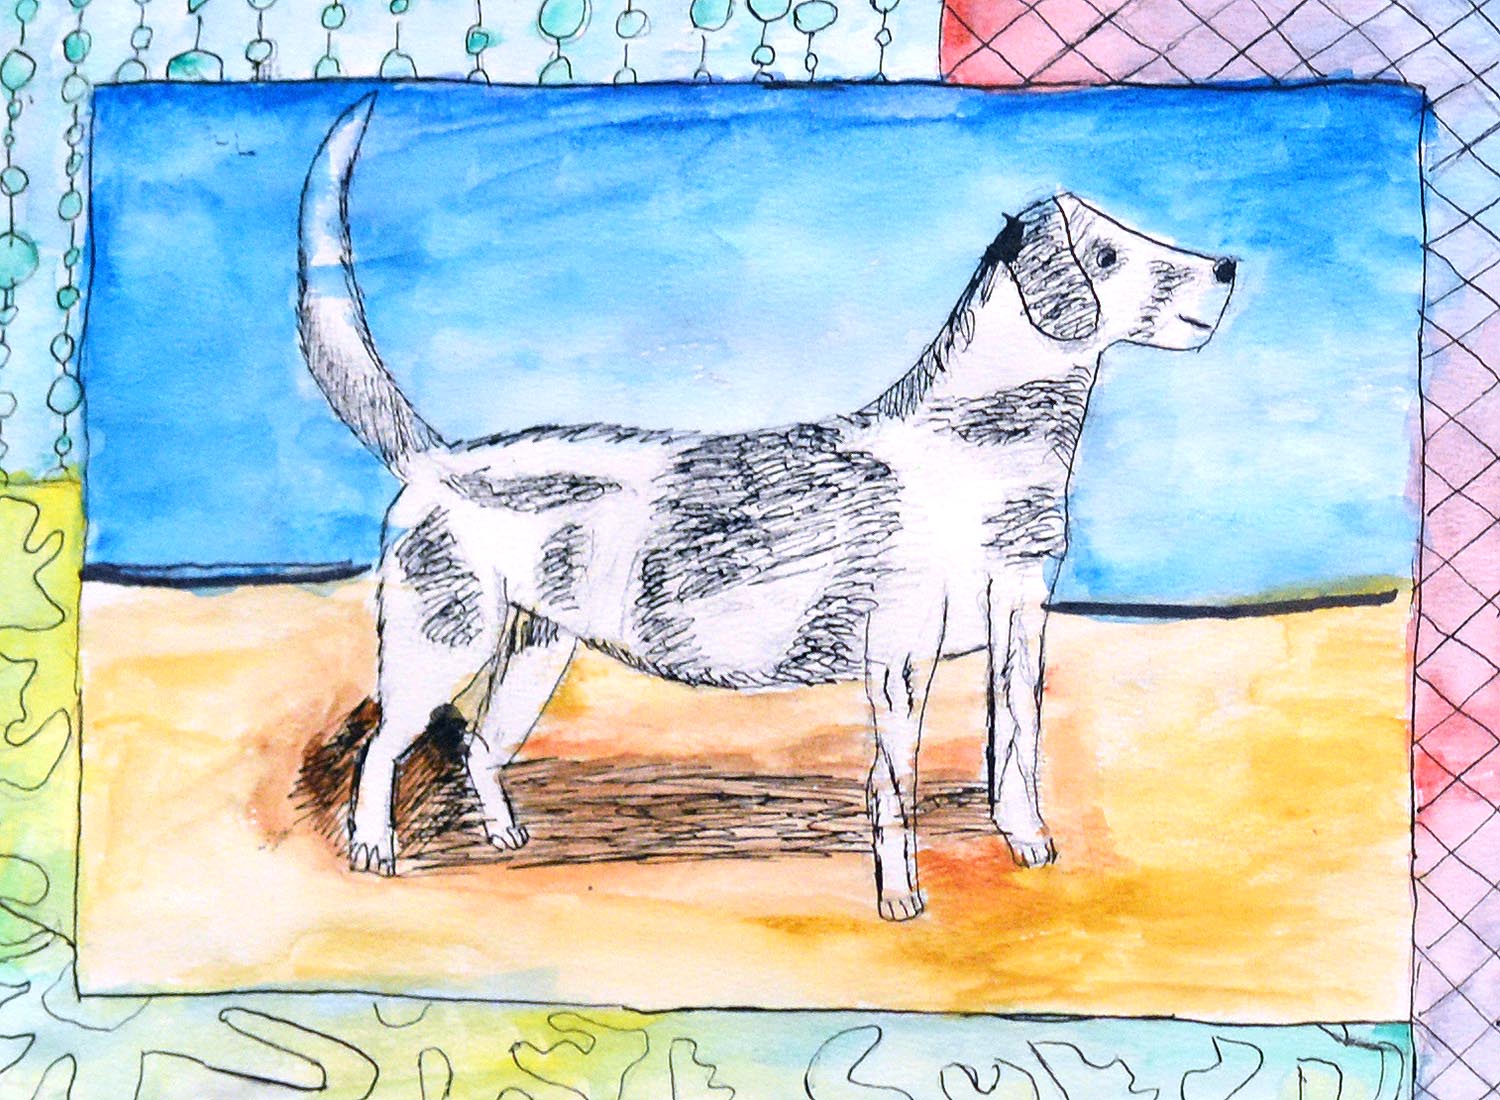 Charlie, a seventh-grader from Woodrow Wilson Middle School, created this artwork as part of a lesson using pen and ink for animal illustration. 